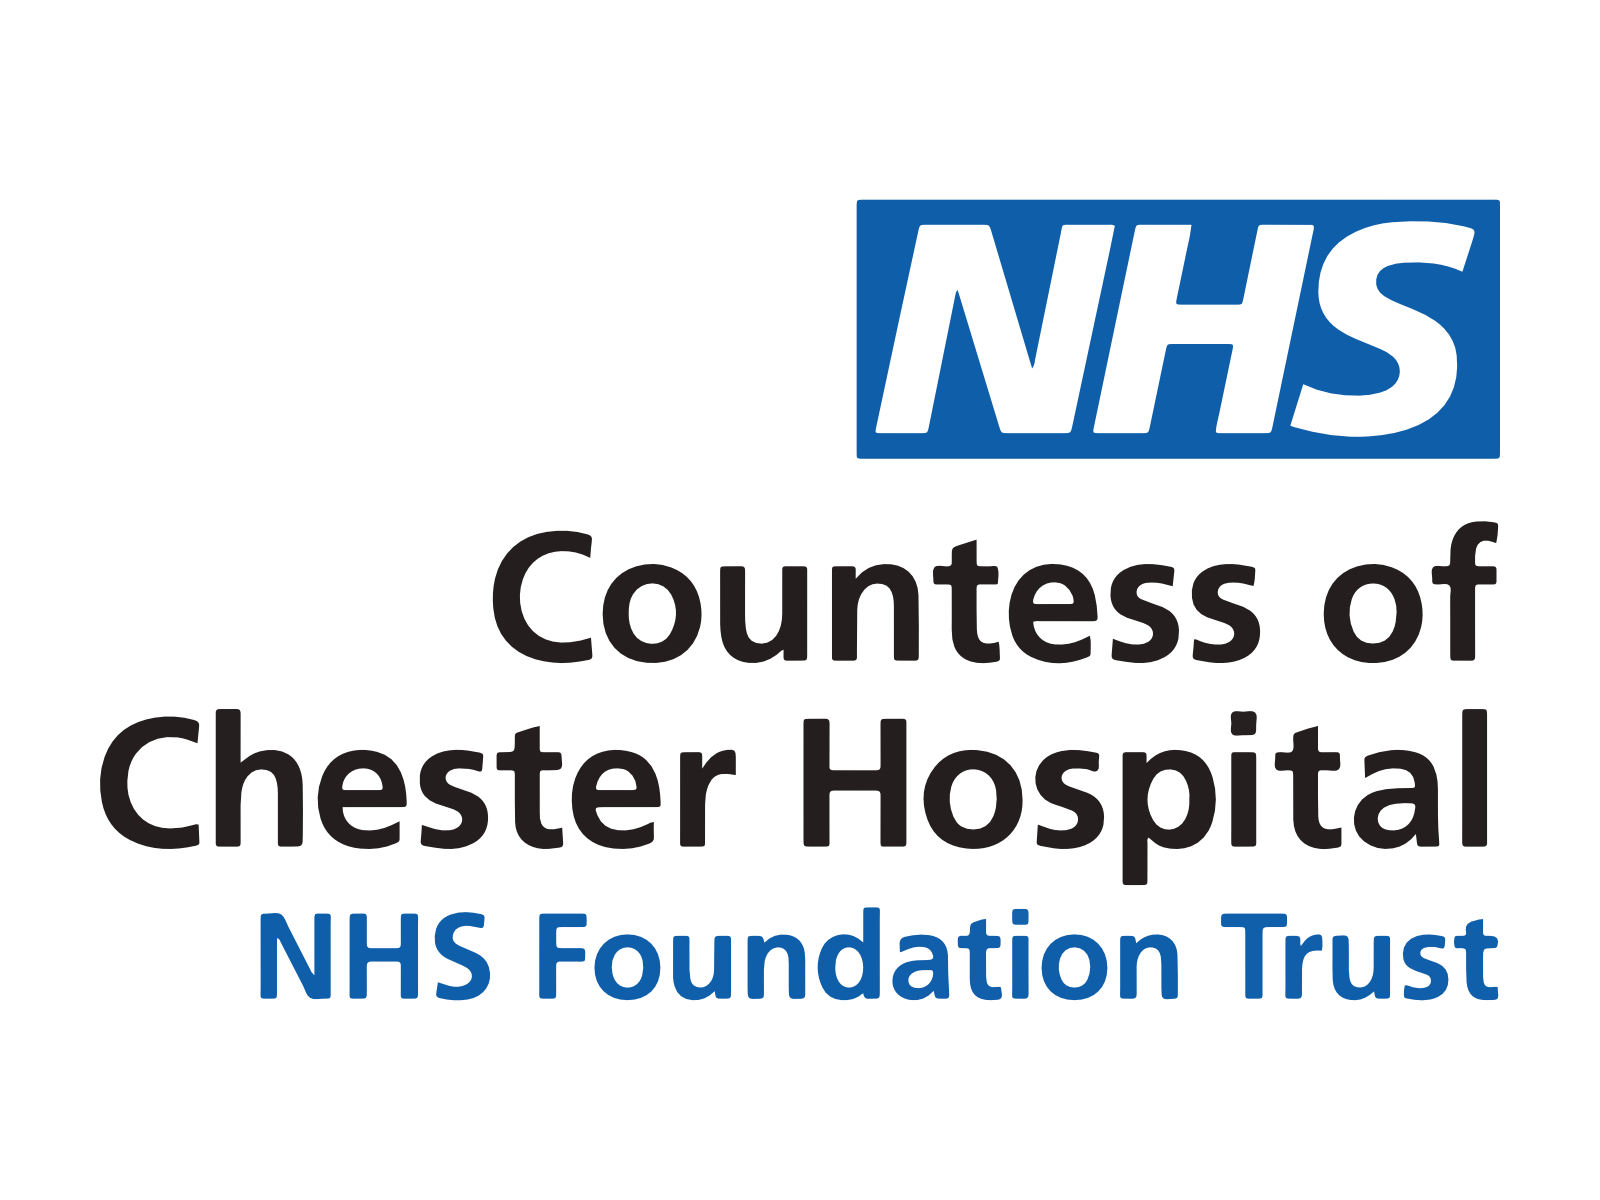 Countess of Chester Hospital